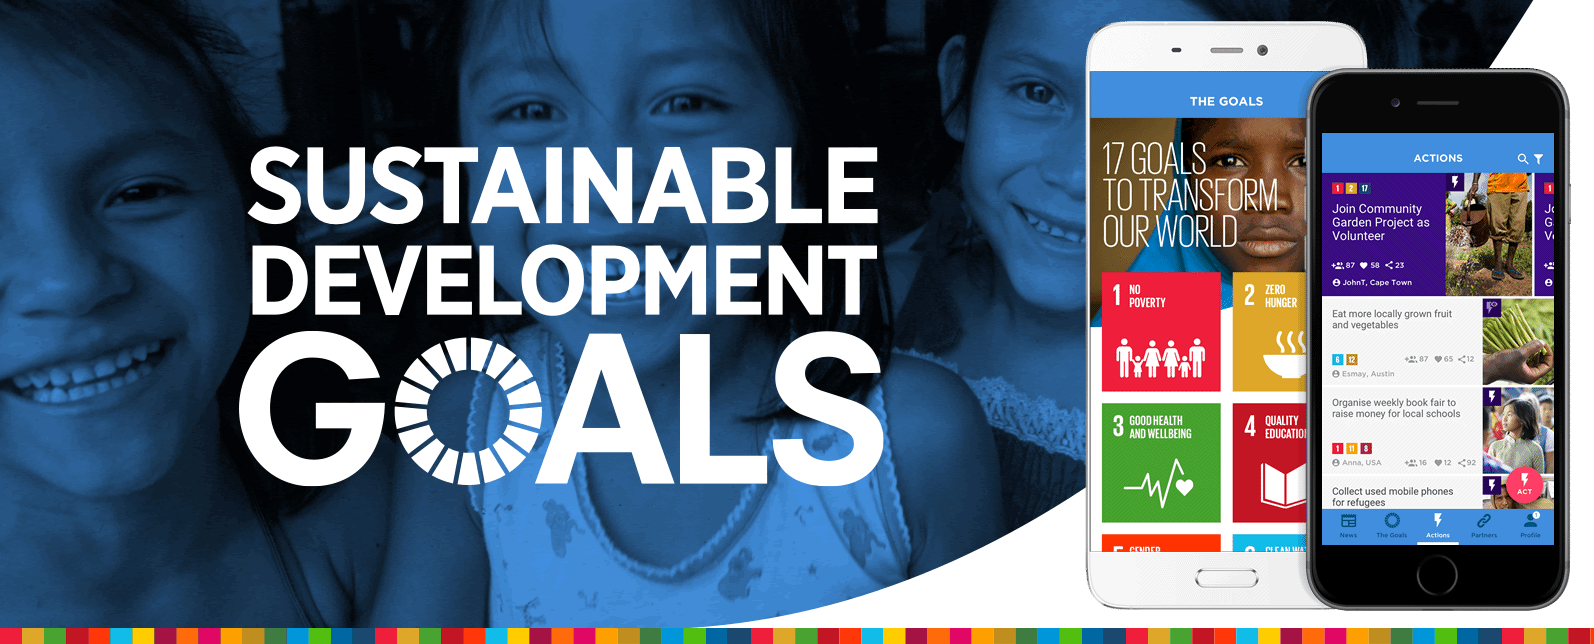 Promotional graphic for the SDGs in Action app. Pictures the words "Sustainable Development Goals" against a photo of three children in a blue tint, with an image of the app on a phone screen on the right side.